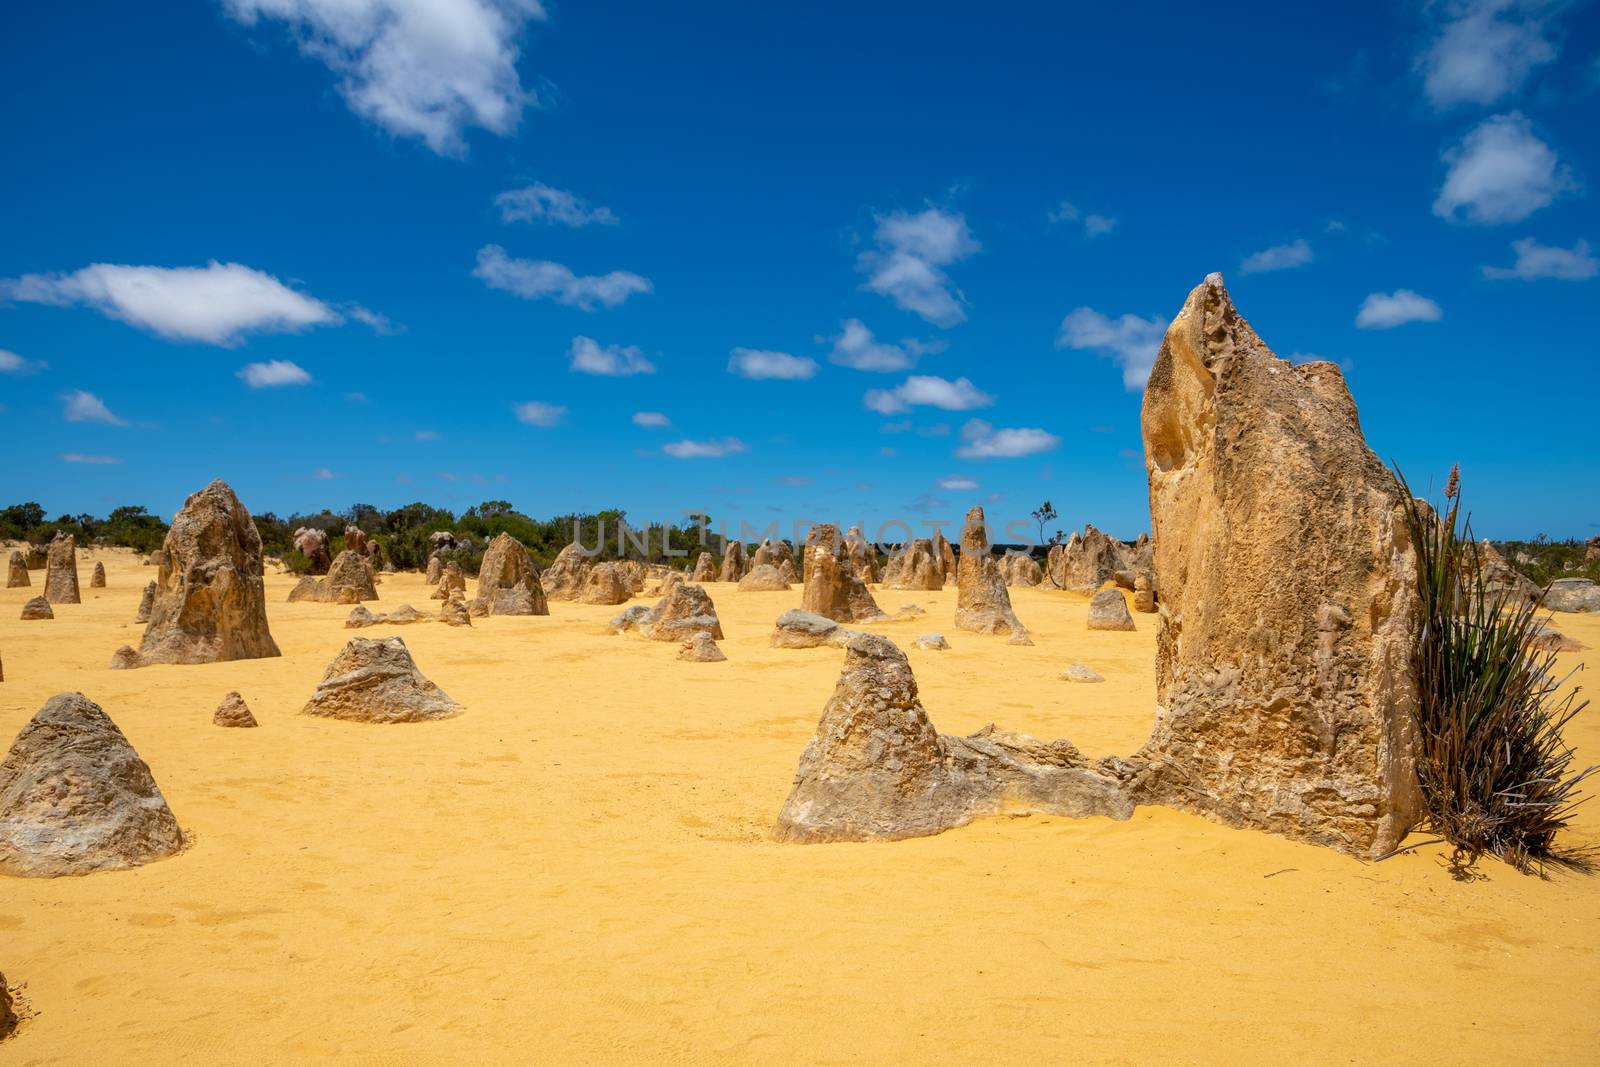 Upright standing rocks at the Pinnacles Desert in Western Australia by MXW_Stock